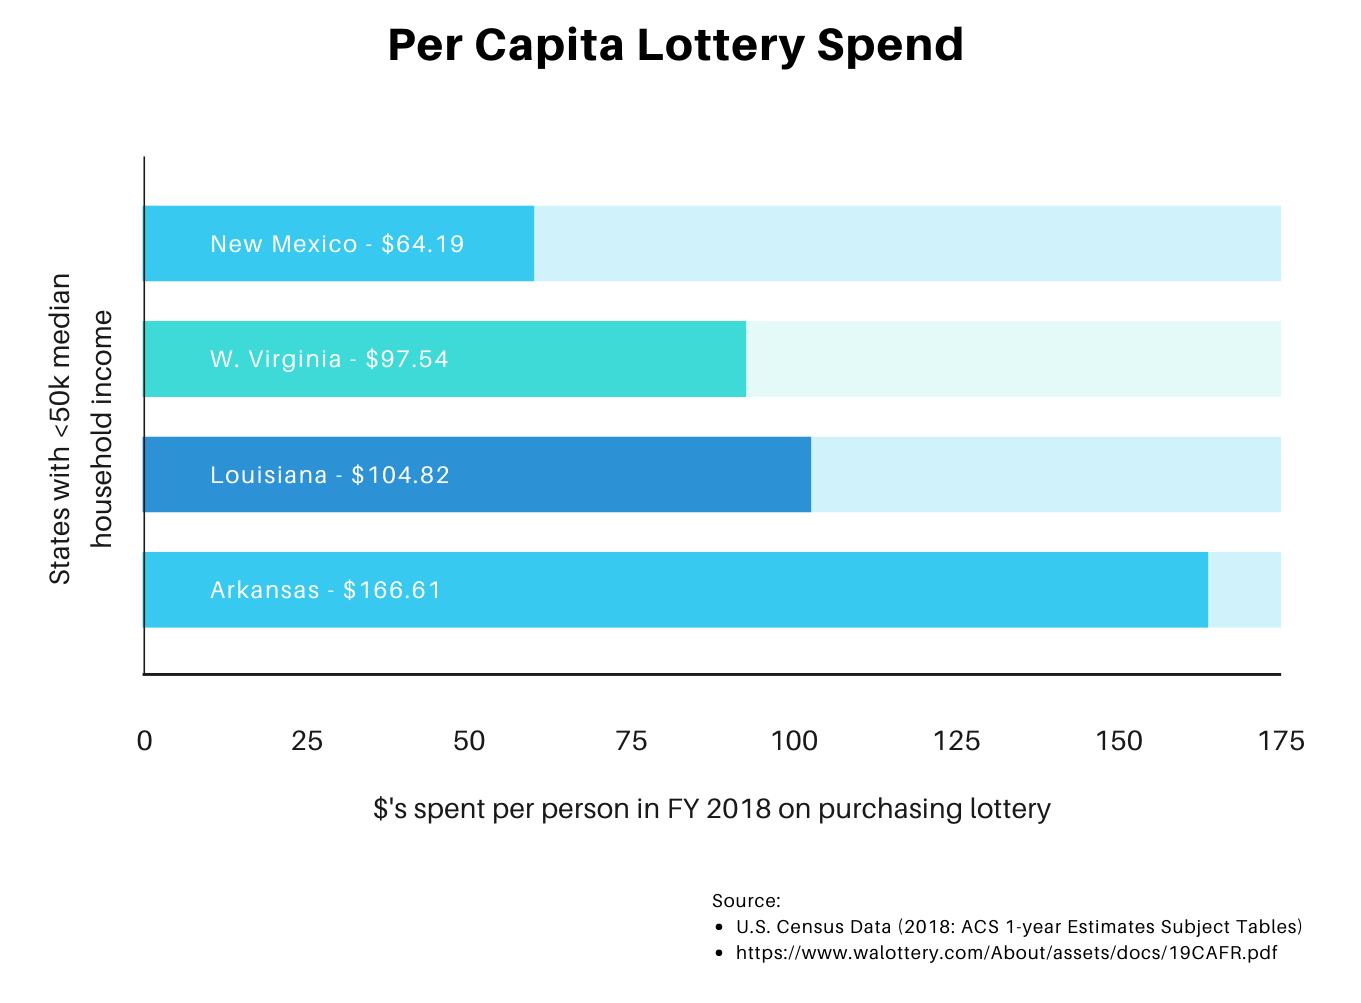 Lottery Spend per Capita in (relatively) low income U.S. states